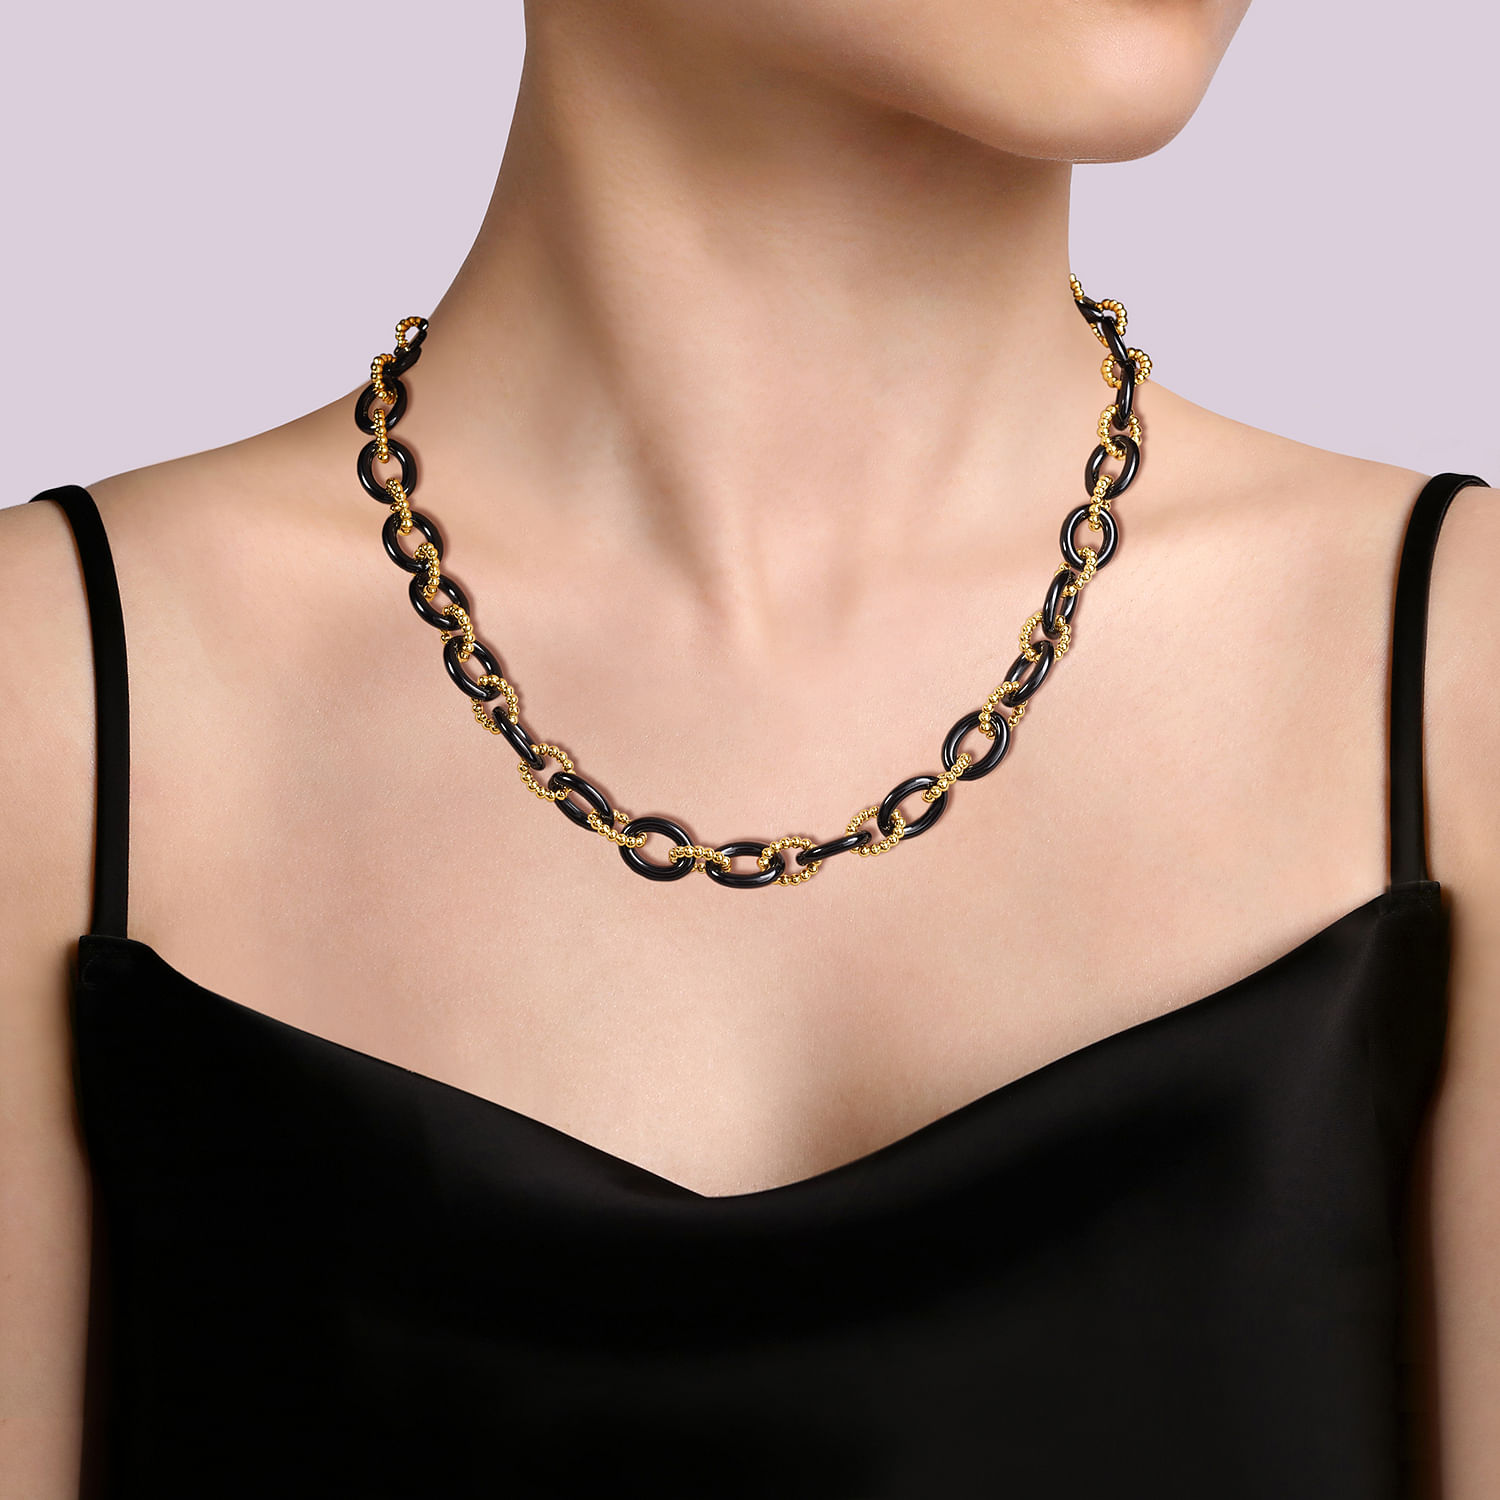 14K Yellow Gold Black Ceramic Oval Link Chain Necklace with Bujukan Connectors